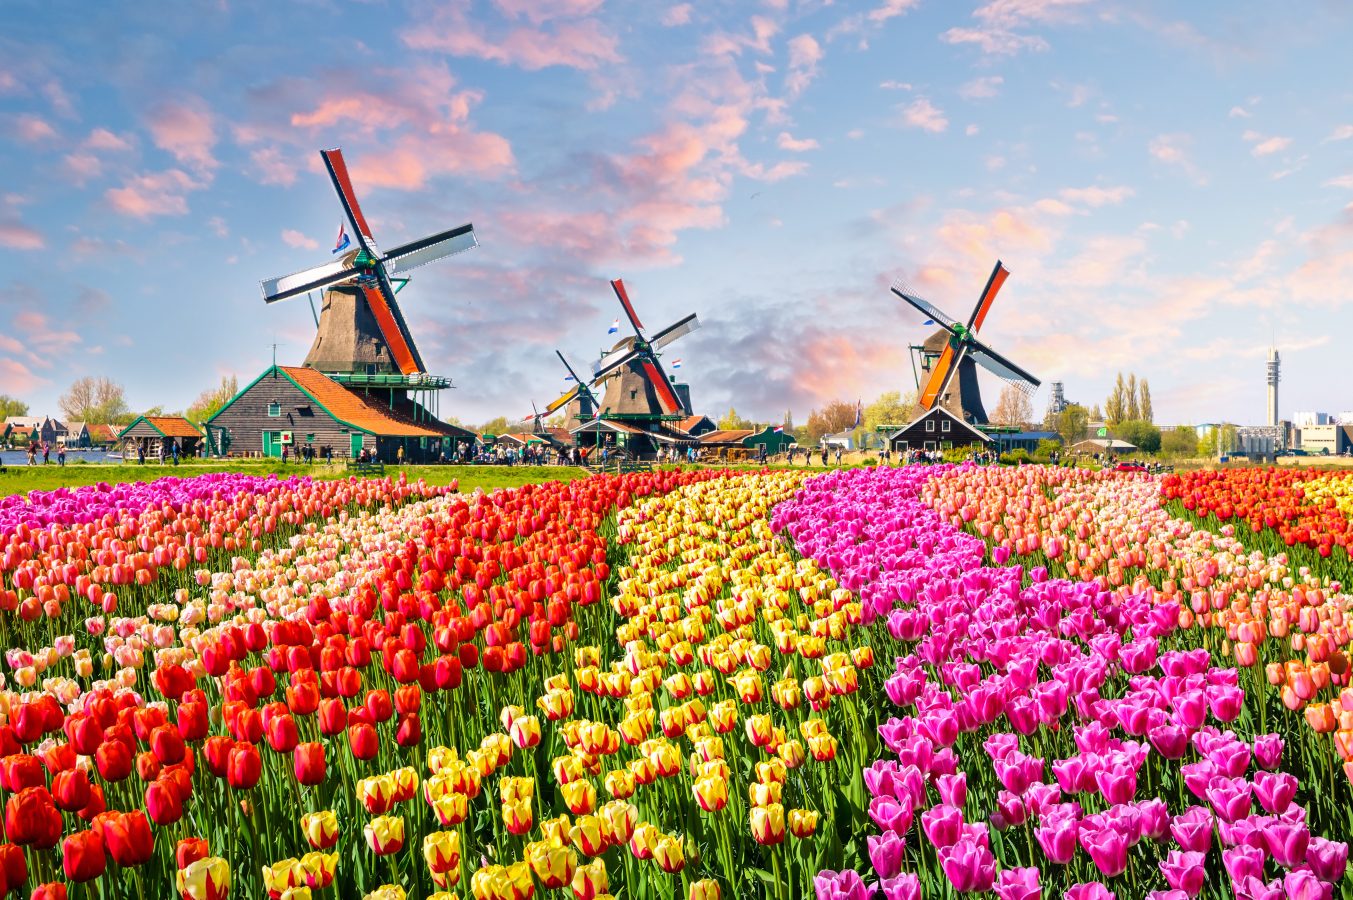 Landscape with tulips, traditional dutch windmills and houses near the canal in Zaanse Schans, Netherlands, Europe. This is a great spring destination to travel to!